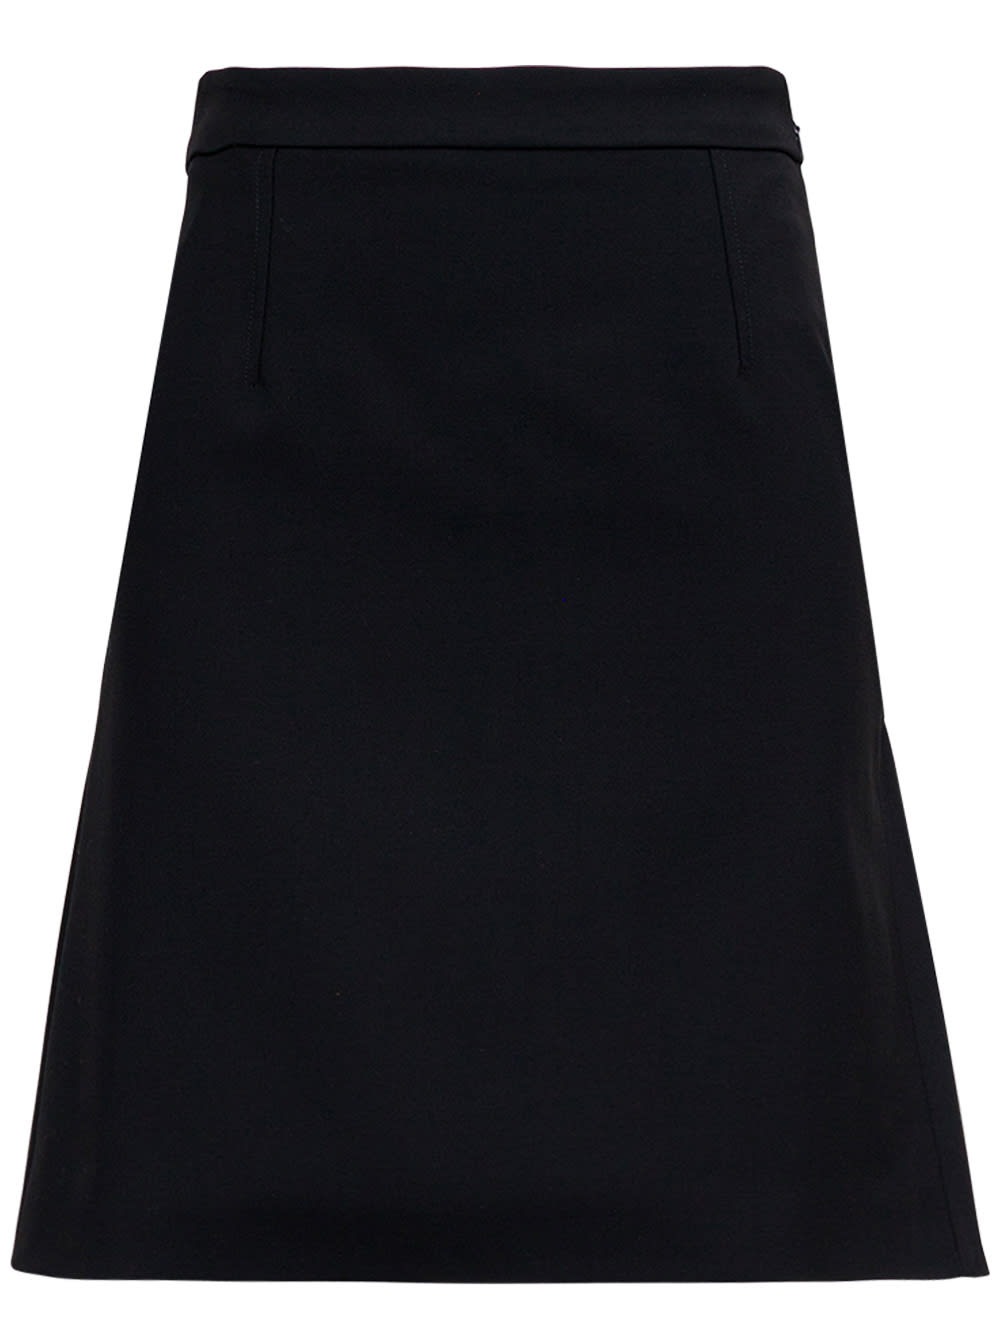 Alexander McQueen Black Wool Skirt With Back Laces Detail